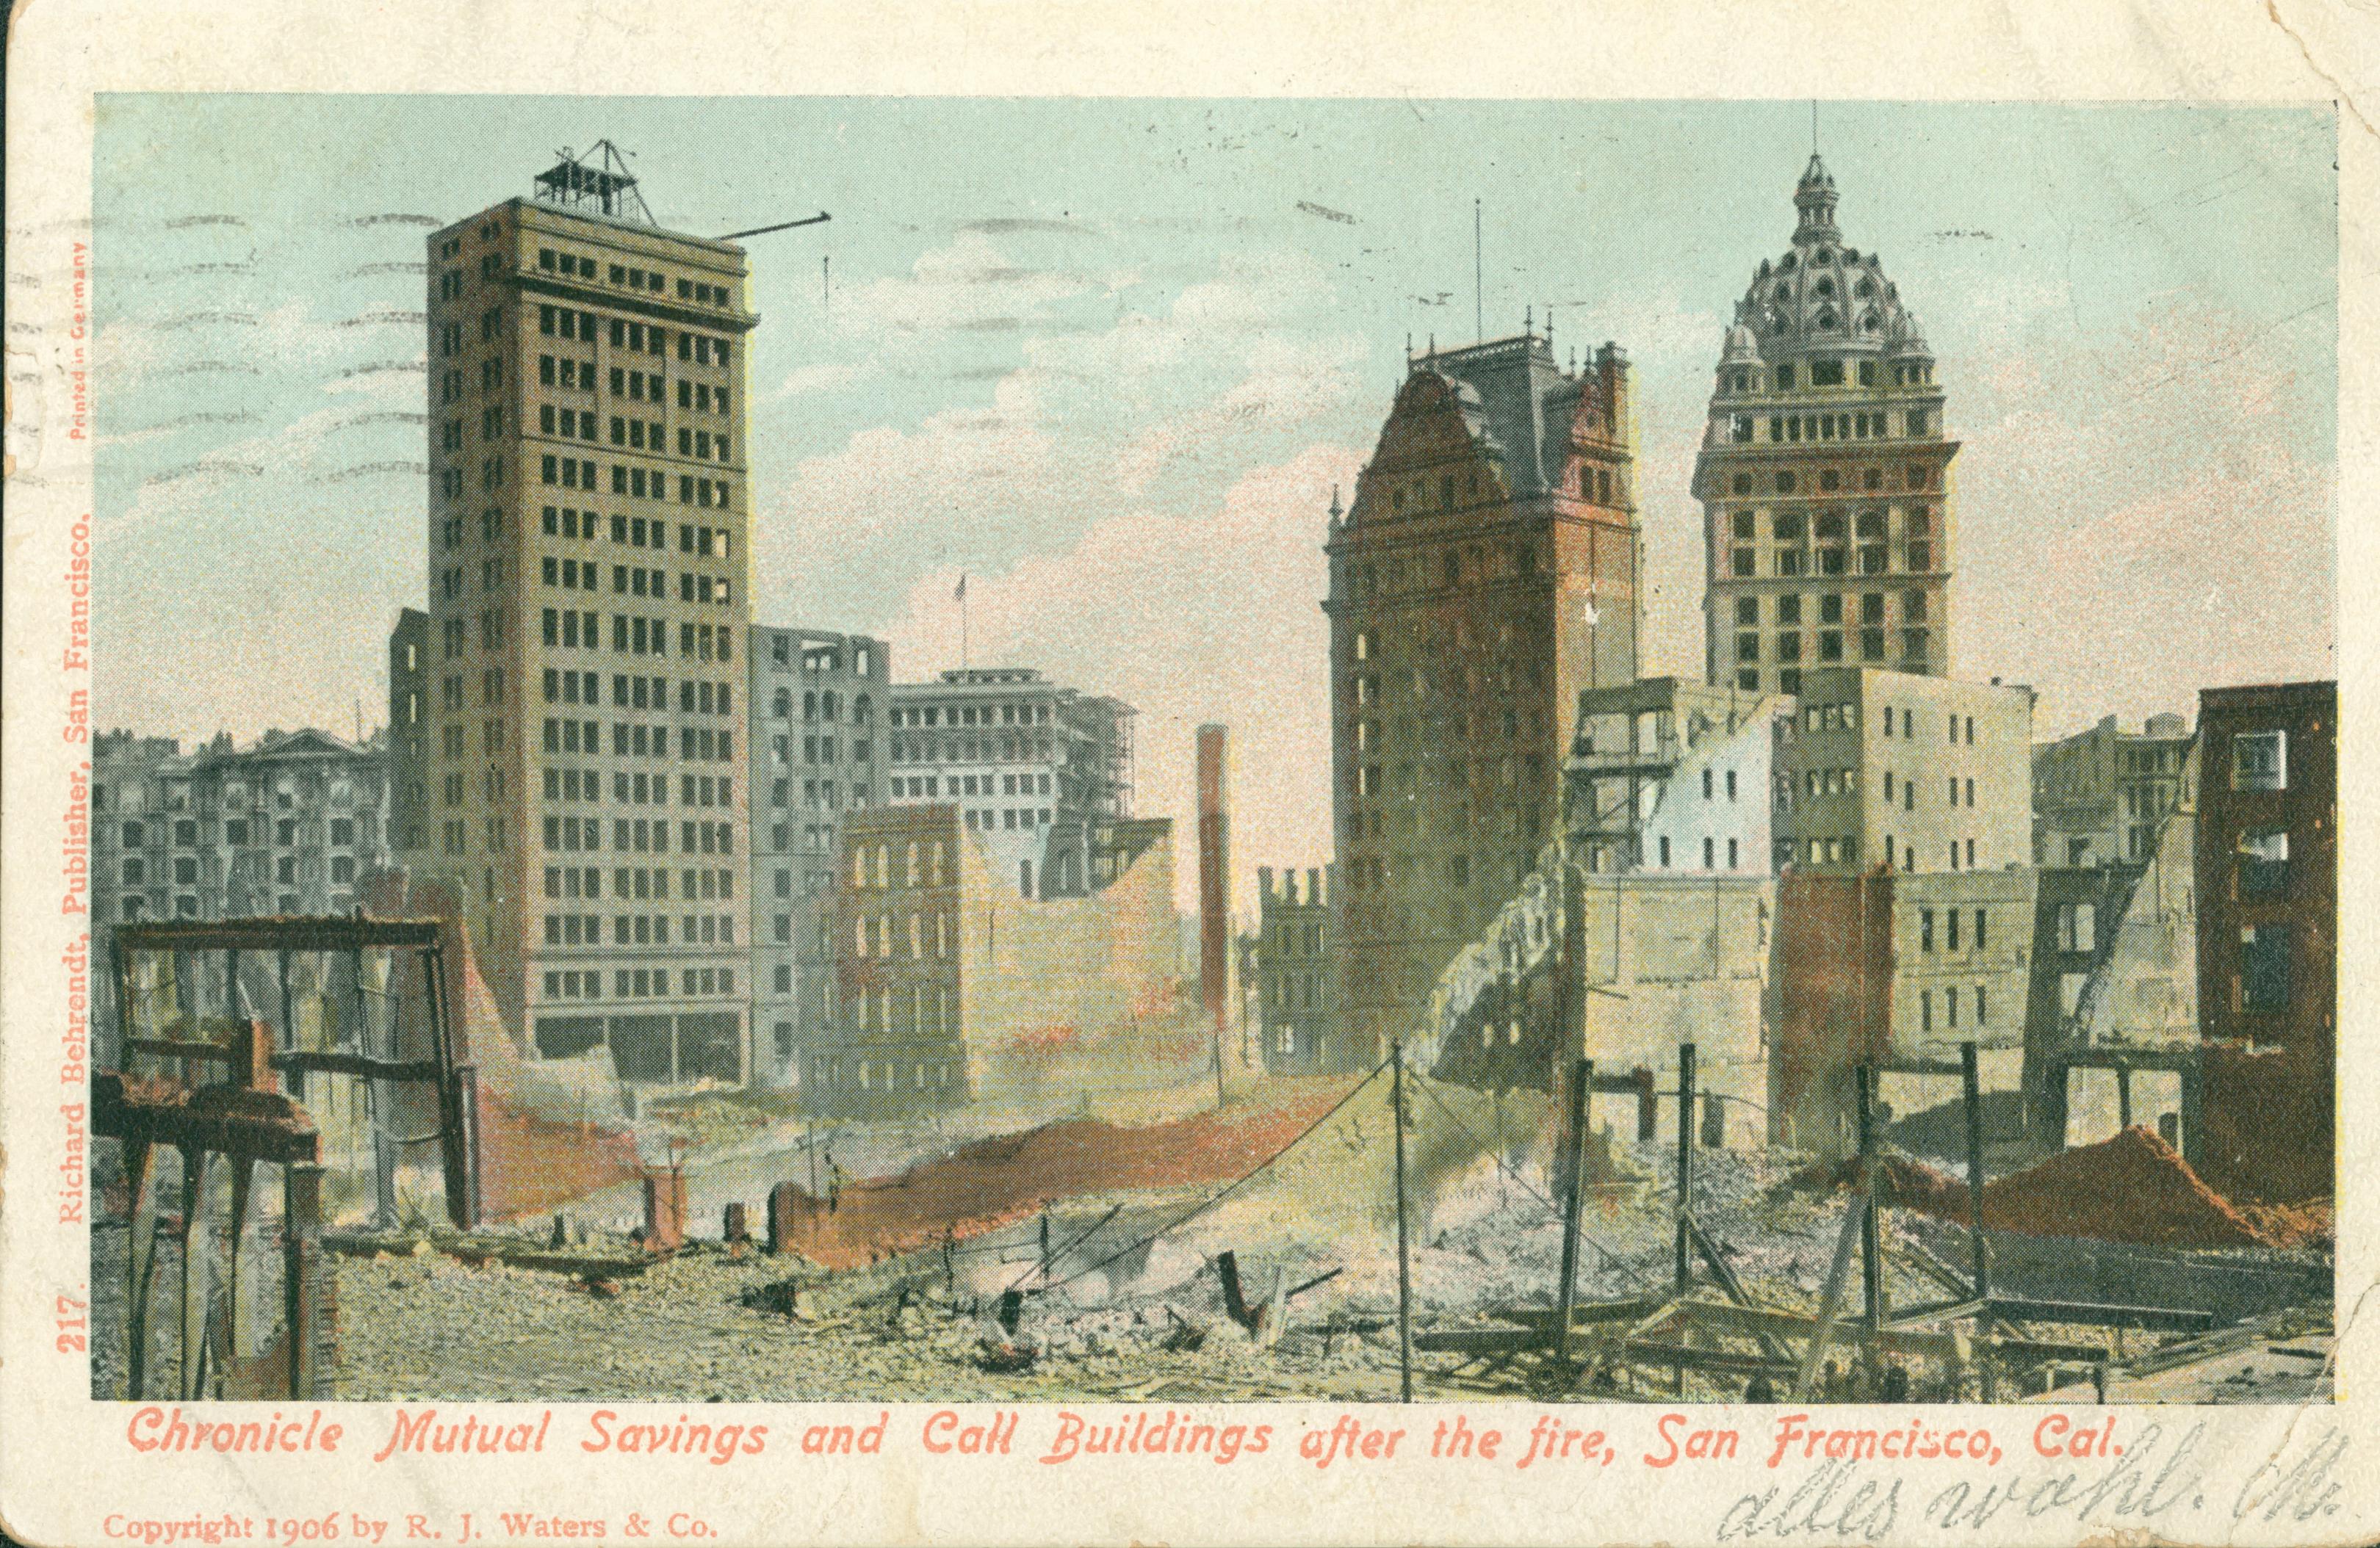 Shows the ruins of the Chronicle, Mutual Savings and Call Buildings after the earthquake